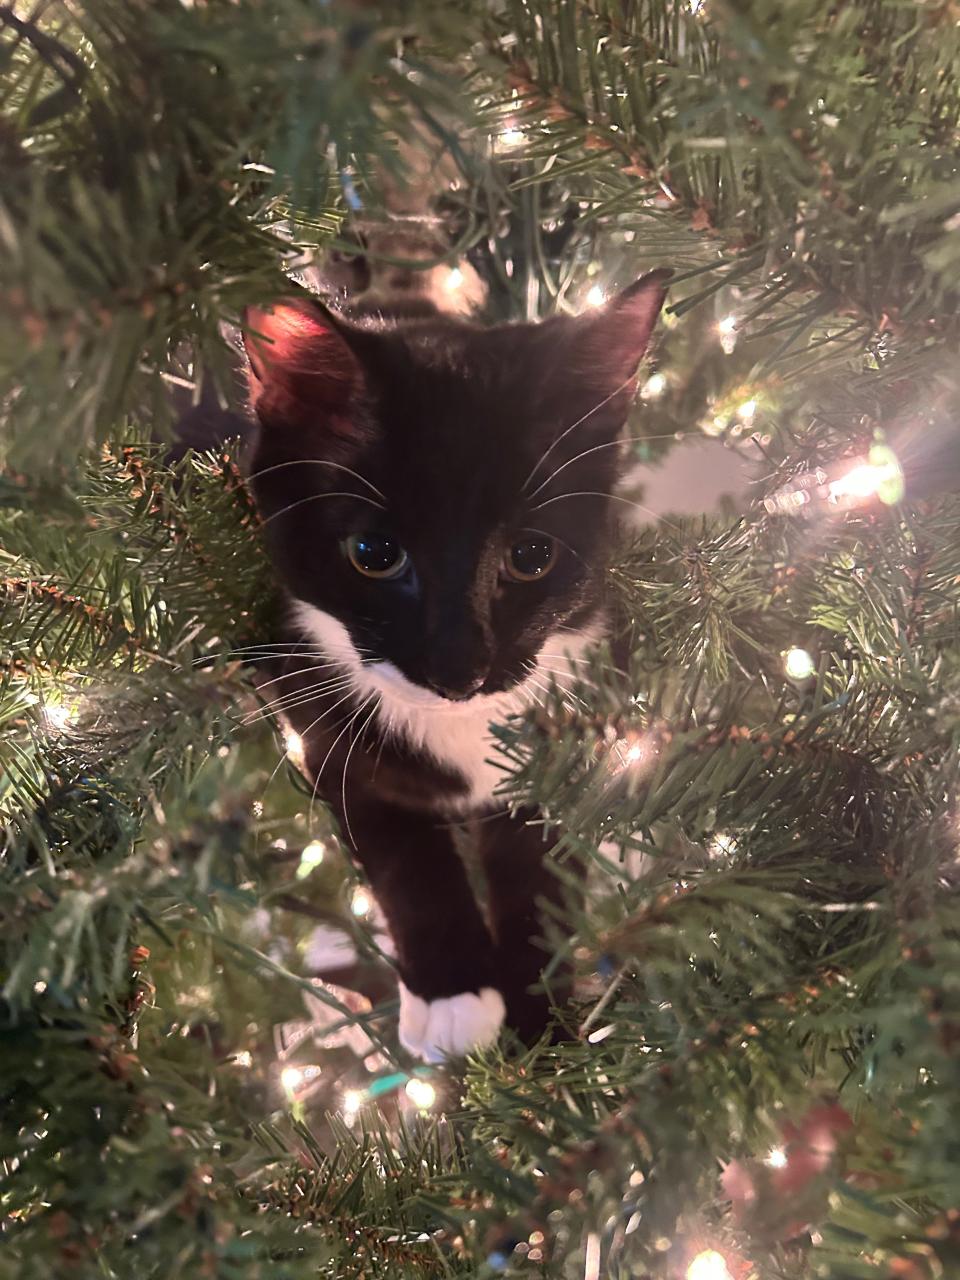 Cats apparently love Christmas trees, like Roy Wilhelm's daughter's cat seen here playing "decoration."